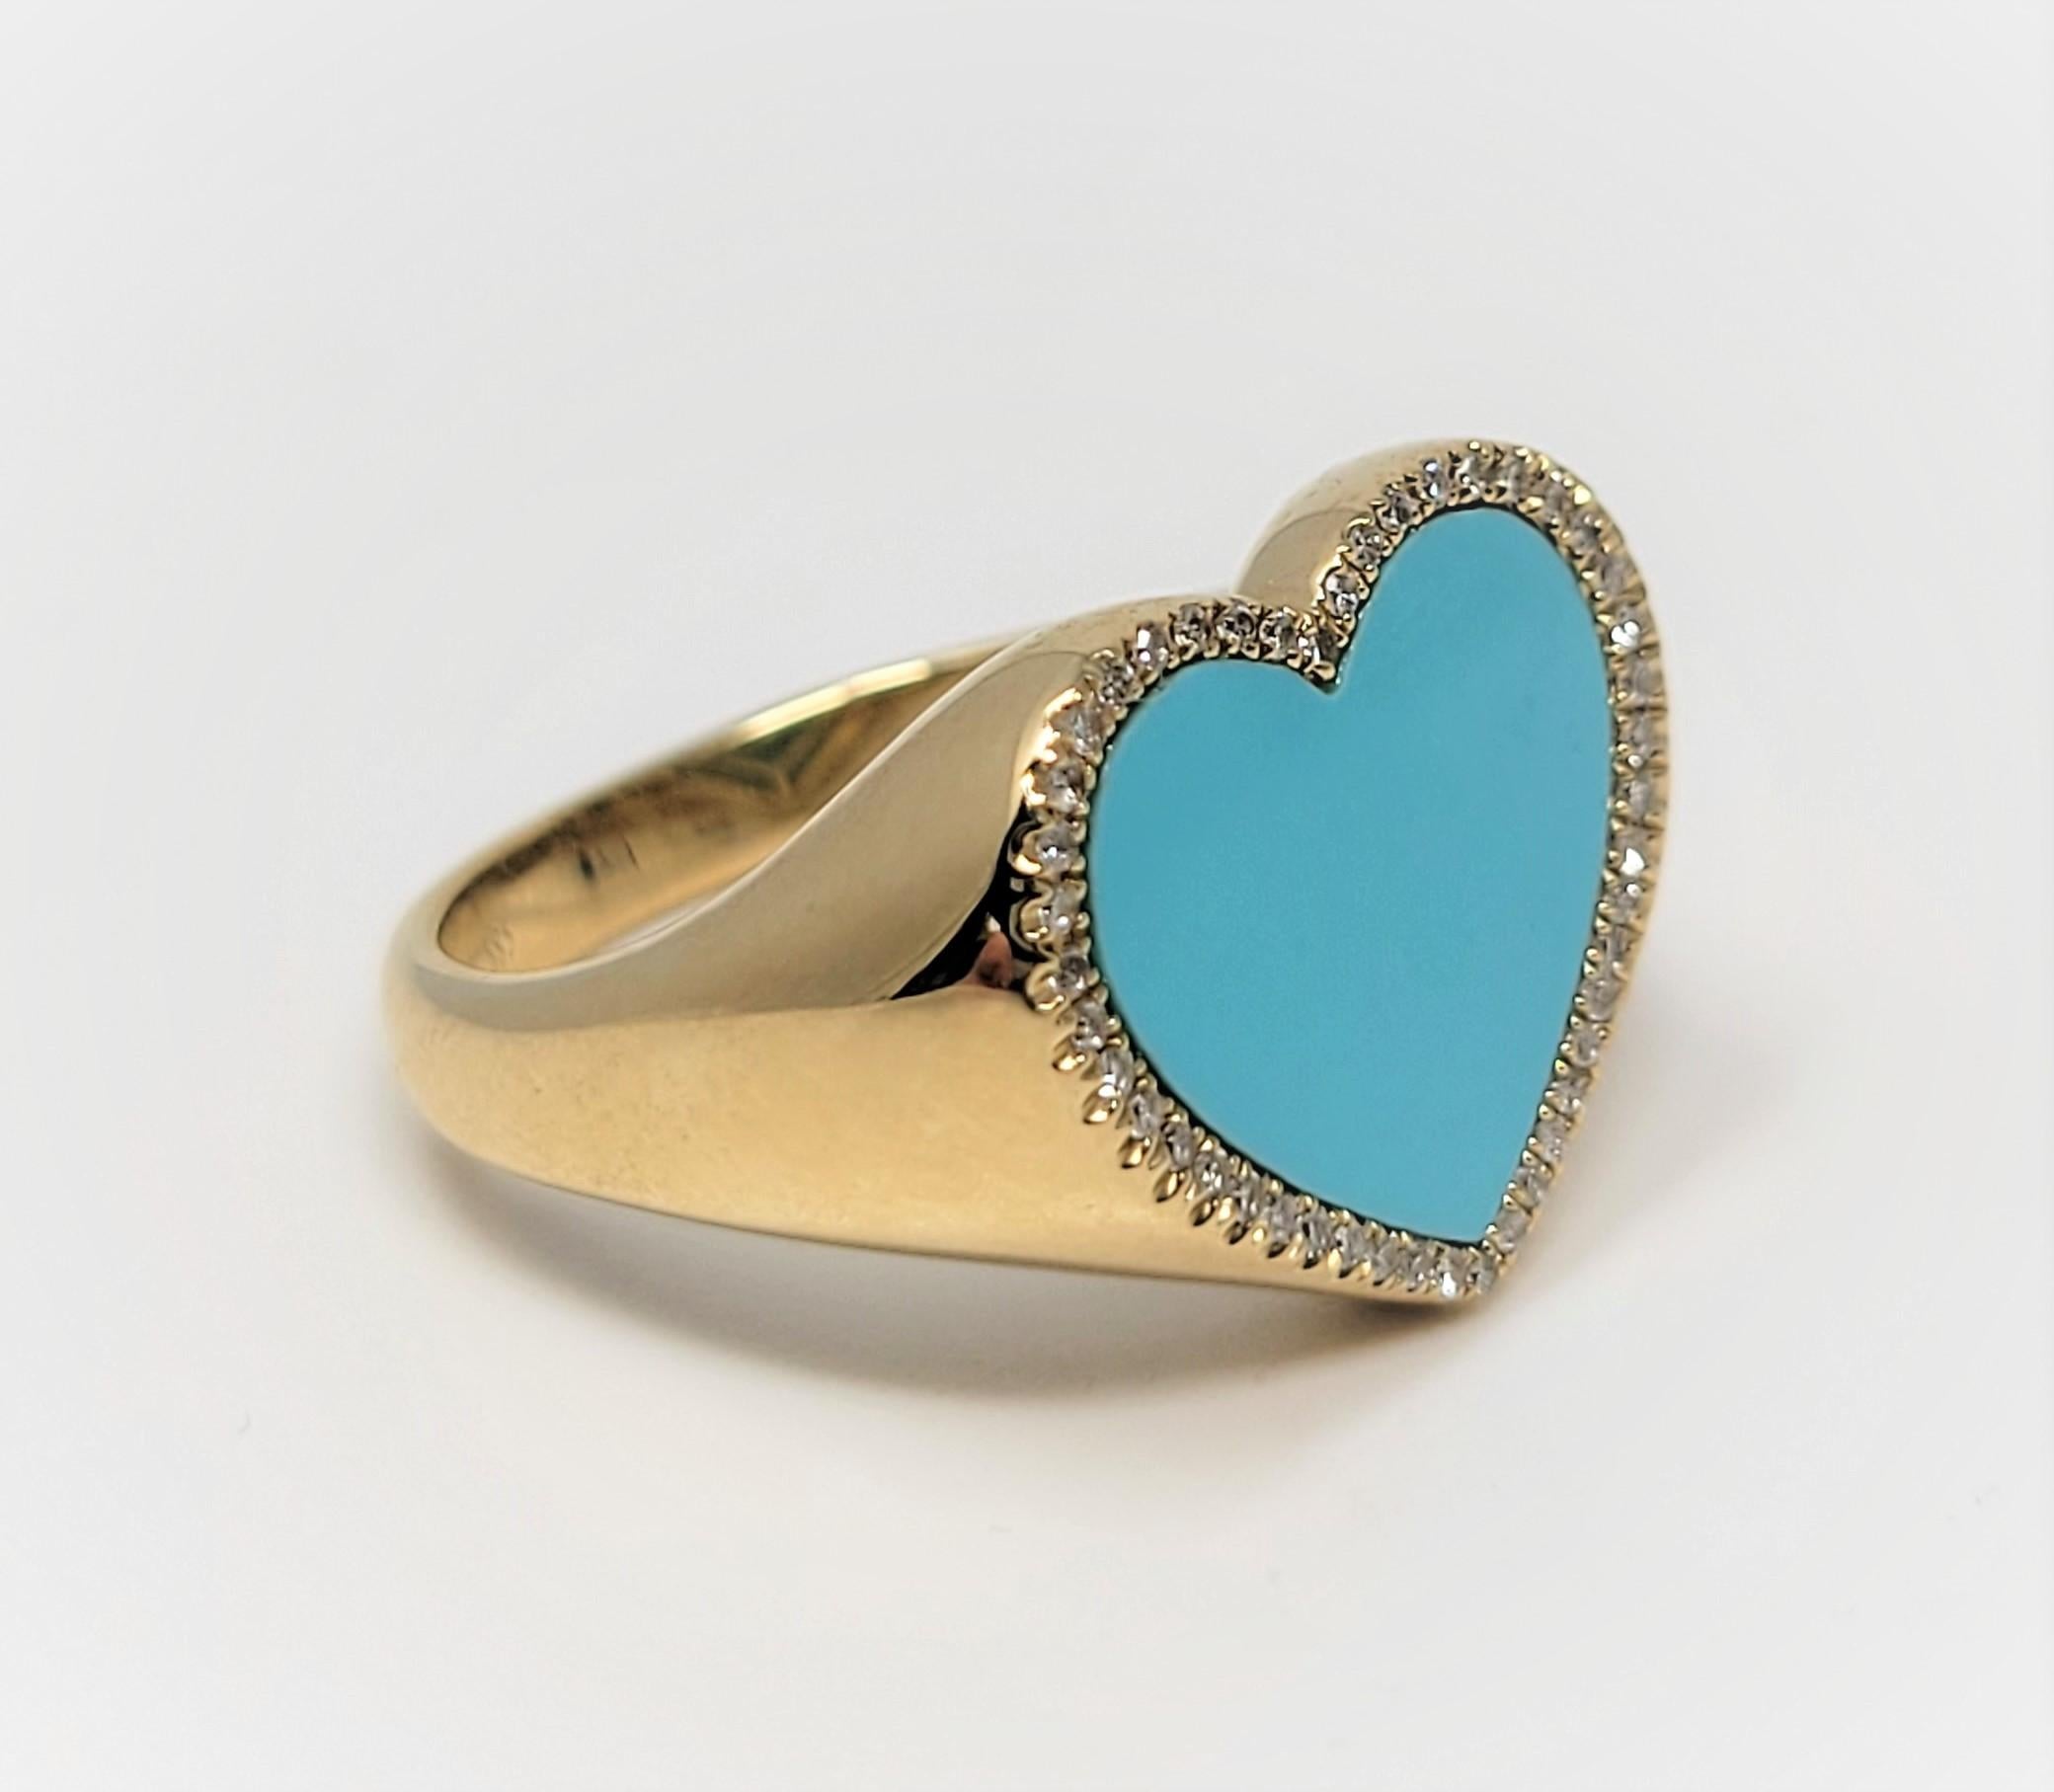 In 14 karat yellow gold, this ring supports a heart-shaped turquoise center, which is surrounded by round diamonds.  Great addition to your jewelry collection!